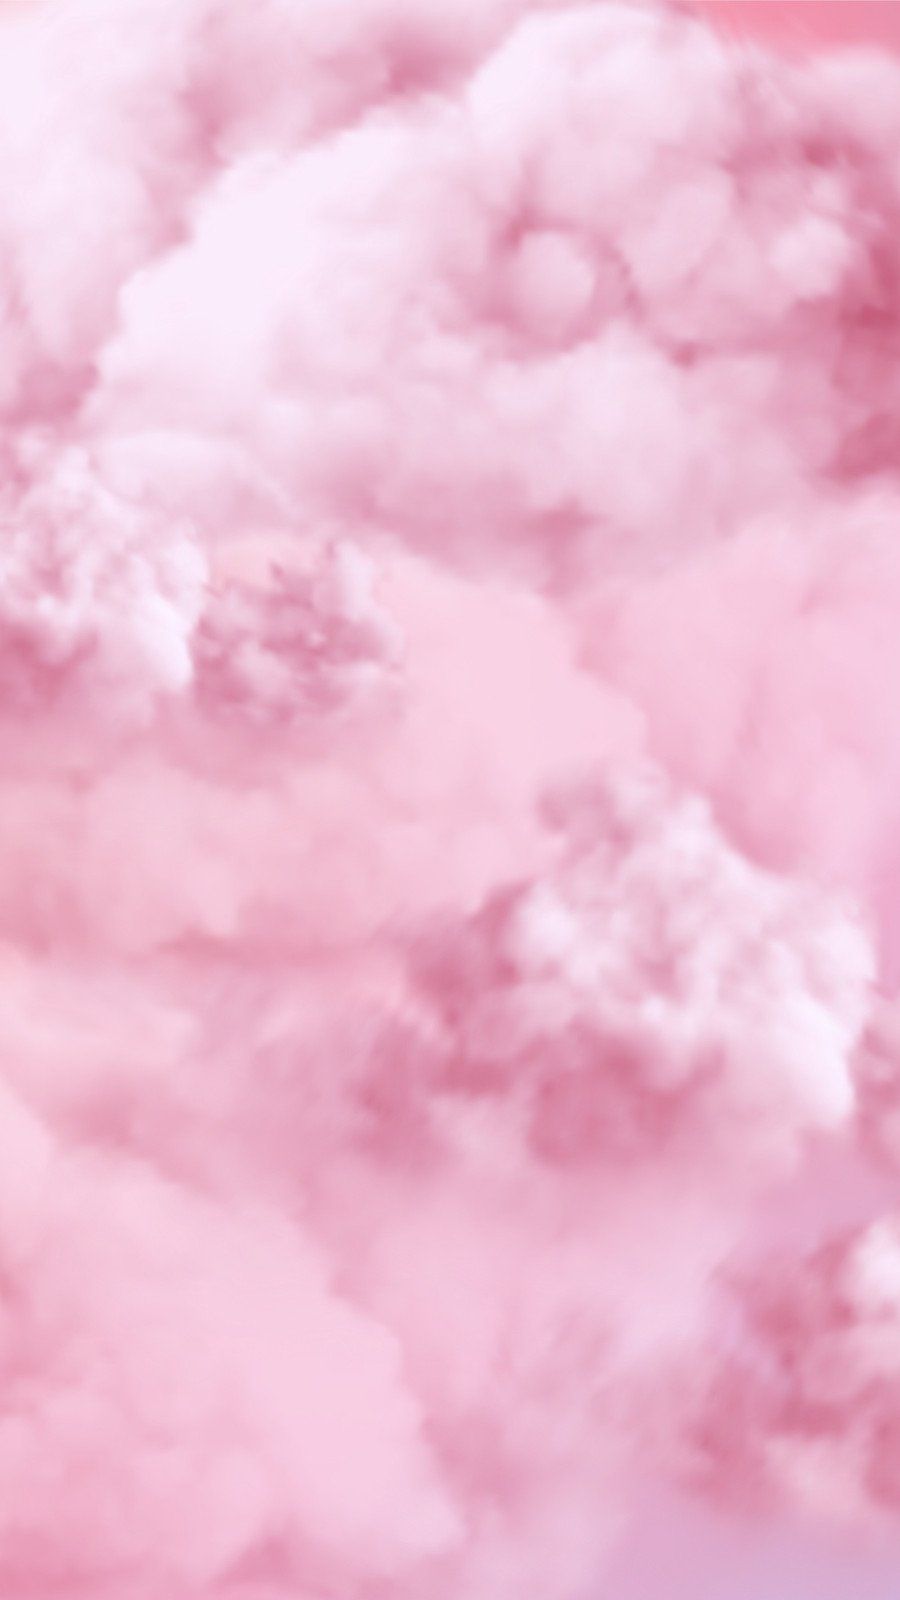 Aesthetic pink clouds wallpaper for iPhone and Android - Cloud